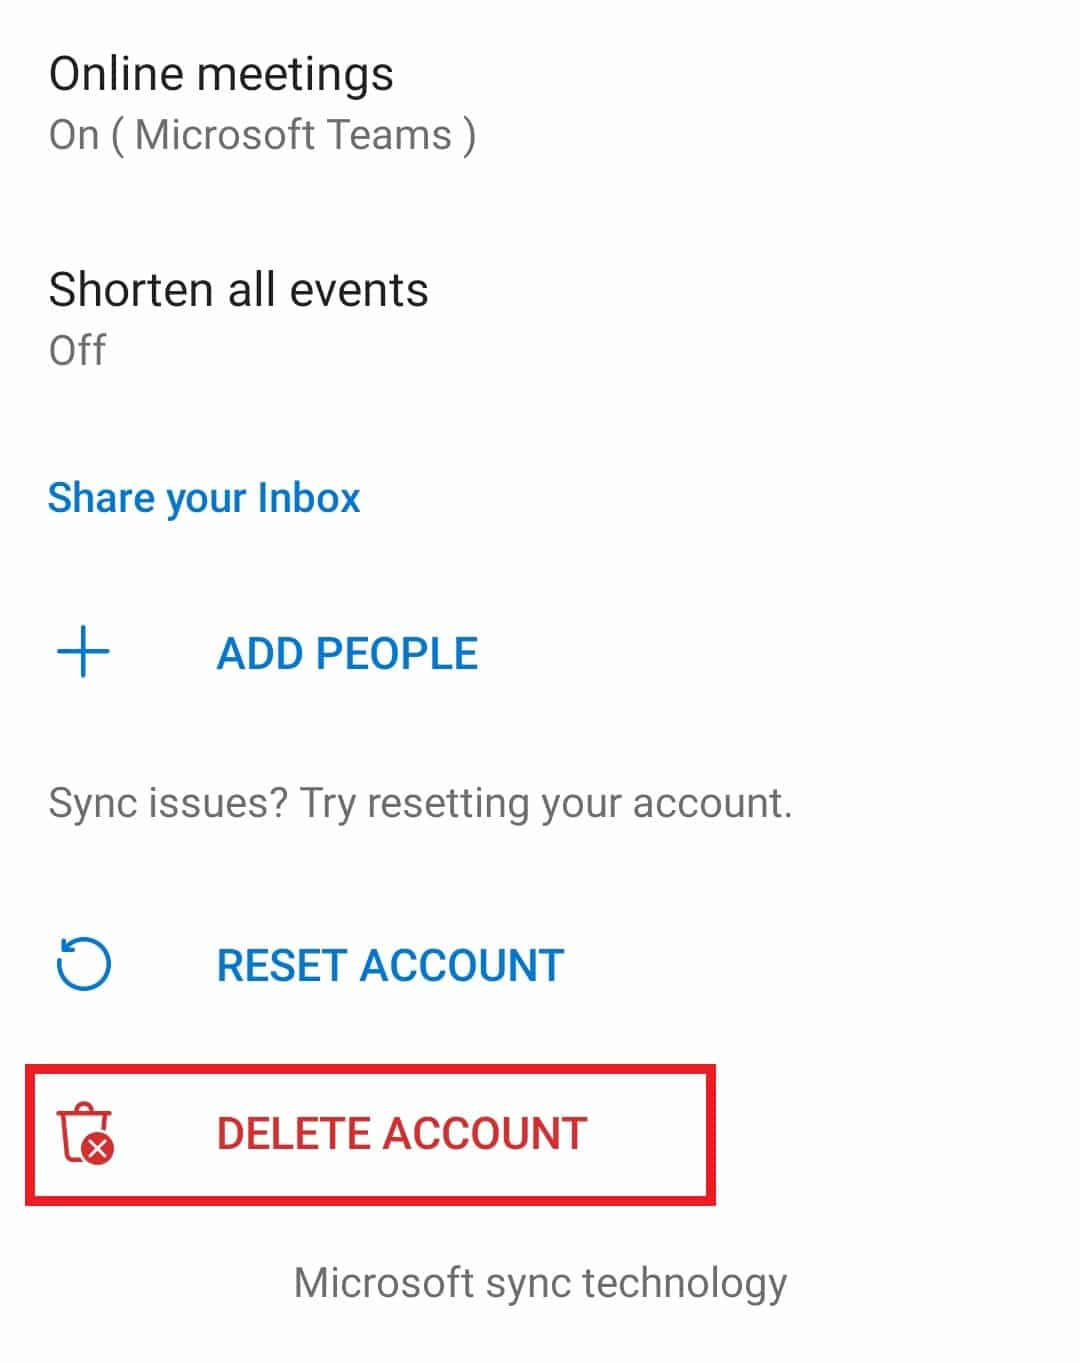 Locate the DELETE ACCOUNT option and tap on it. 